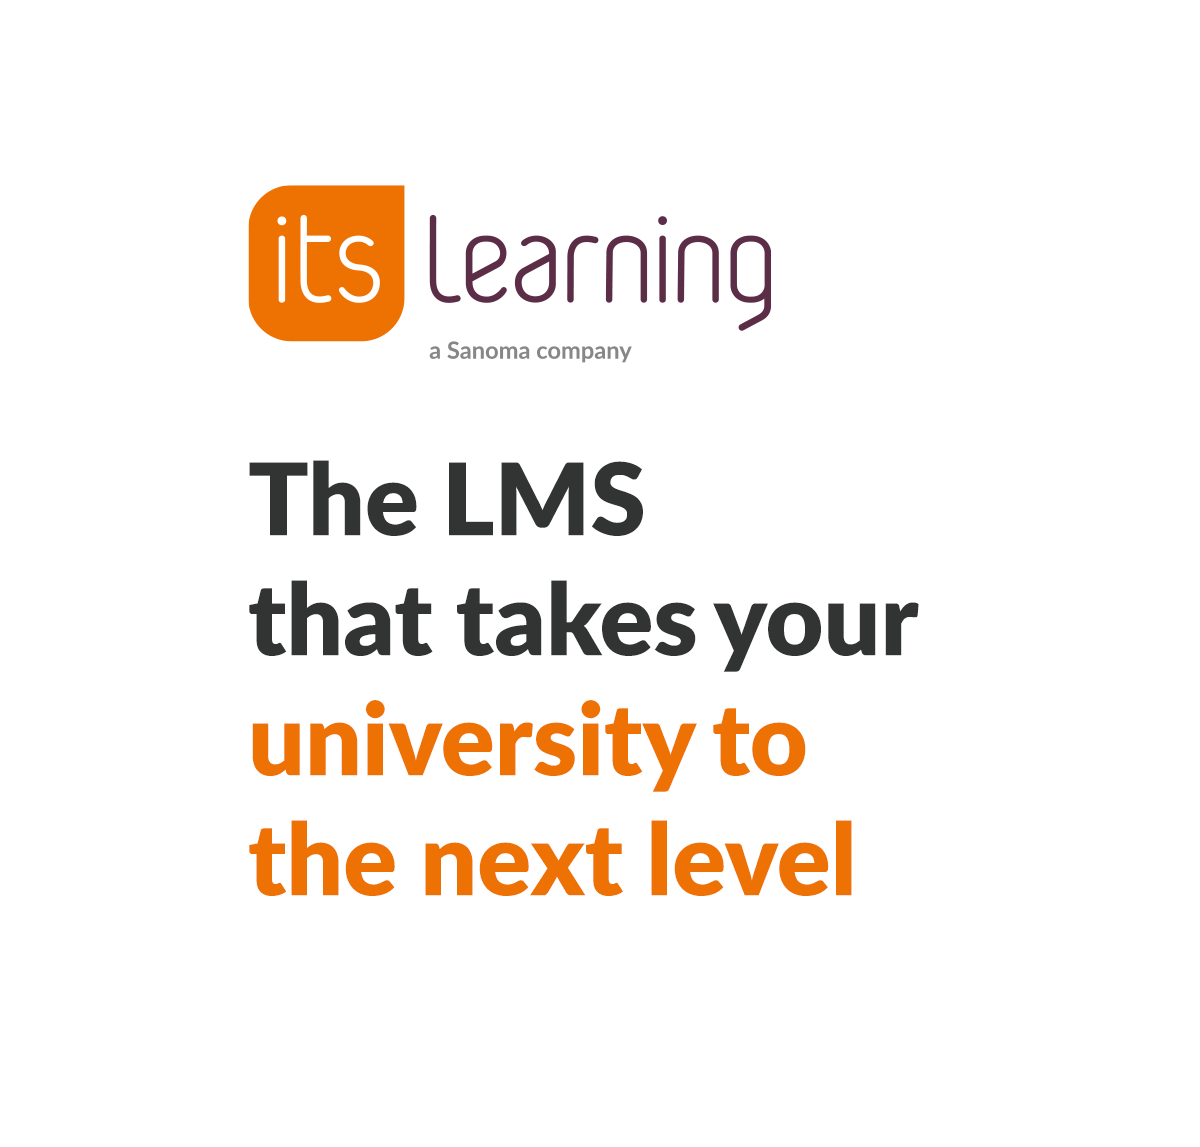 The LMS that takes your university to the next level